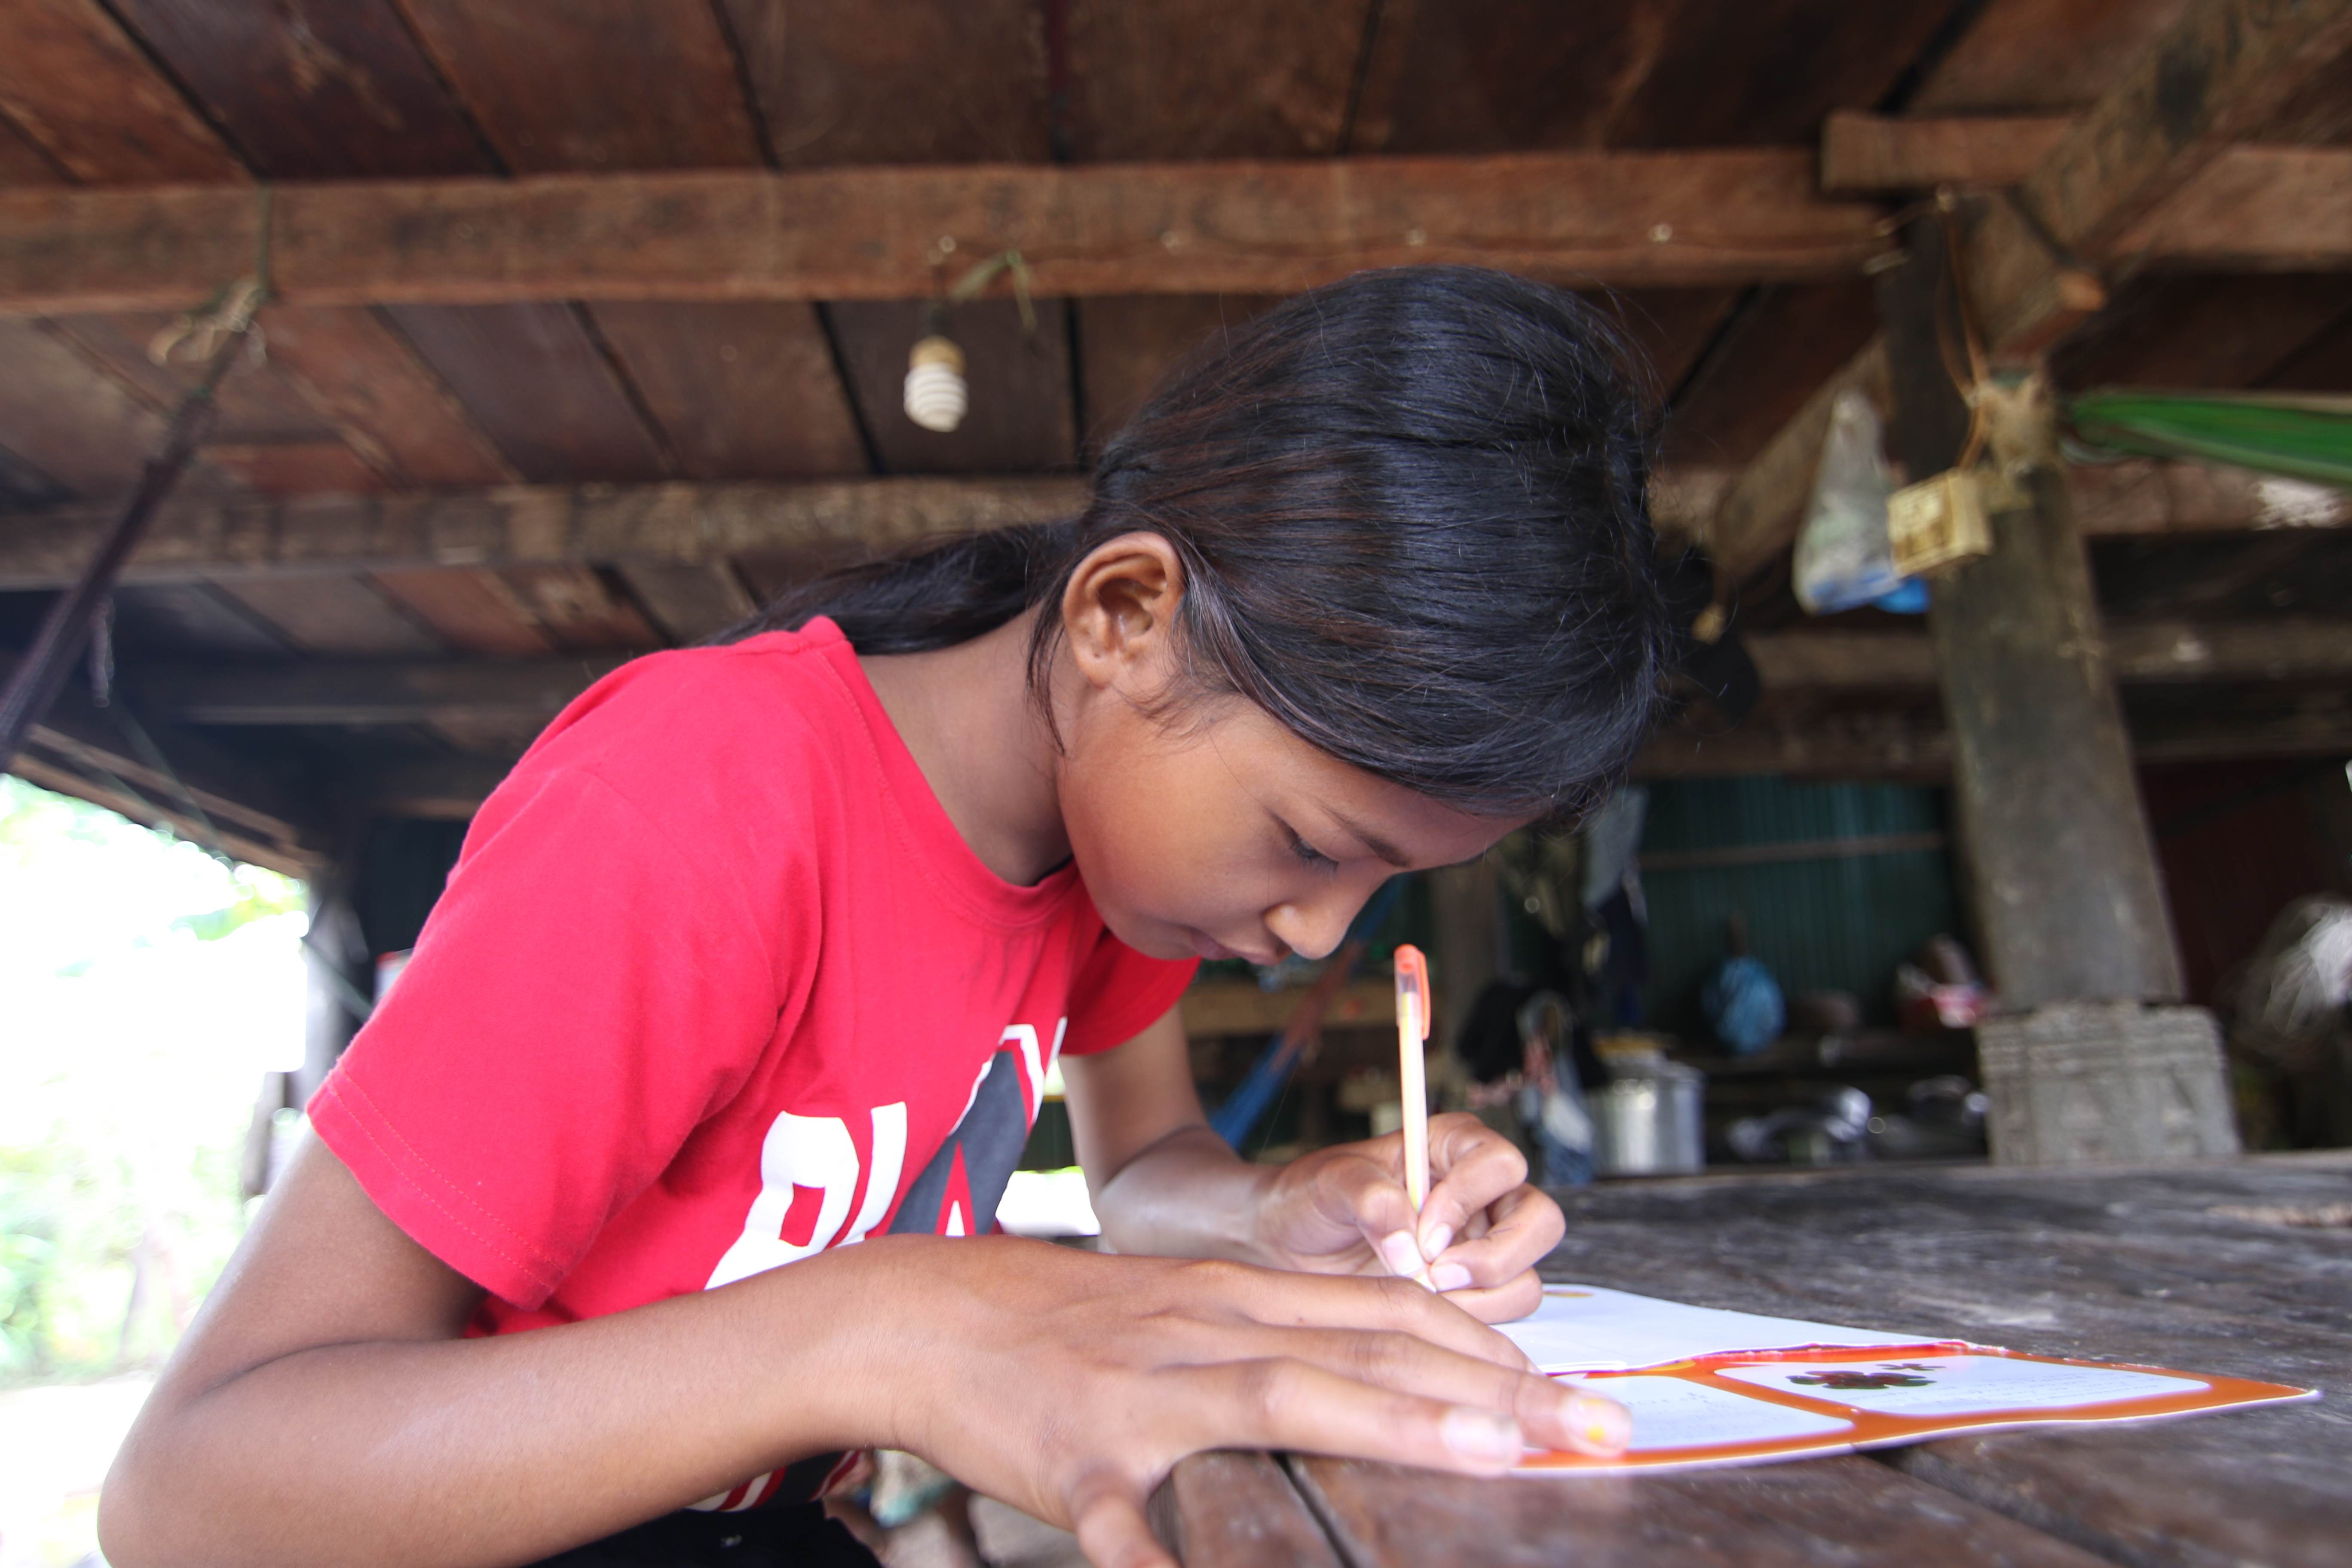 13 year old Ny from Cambodia writes cards for her sponsor